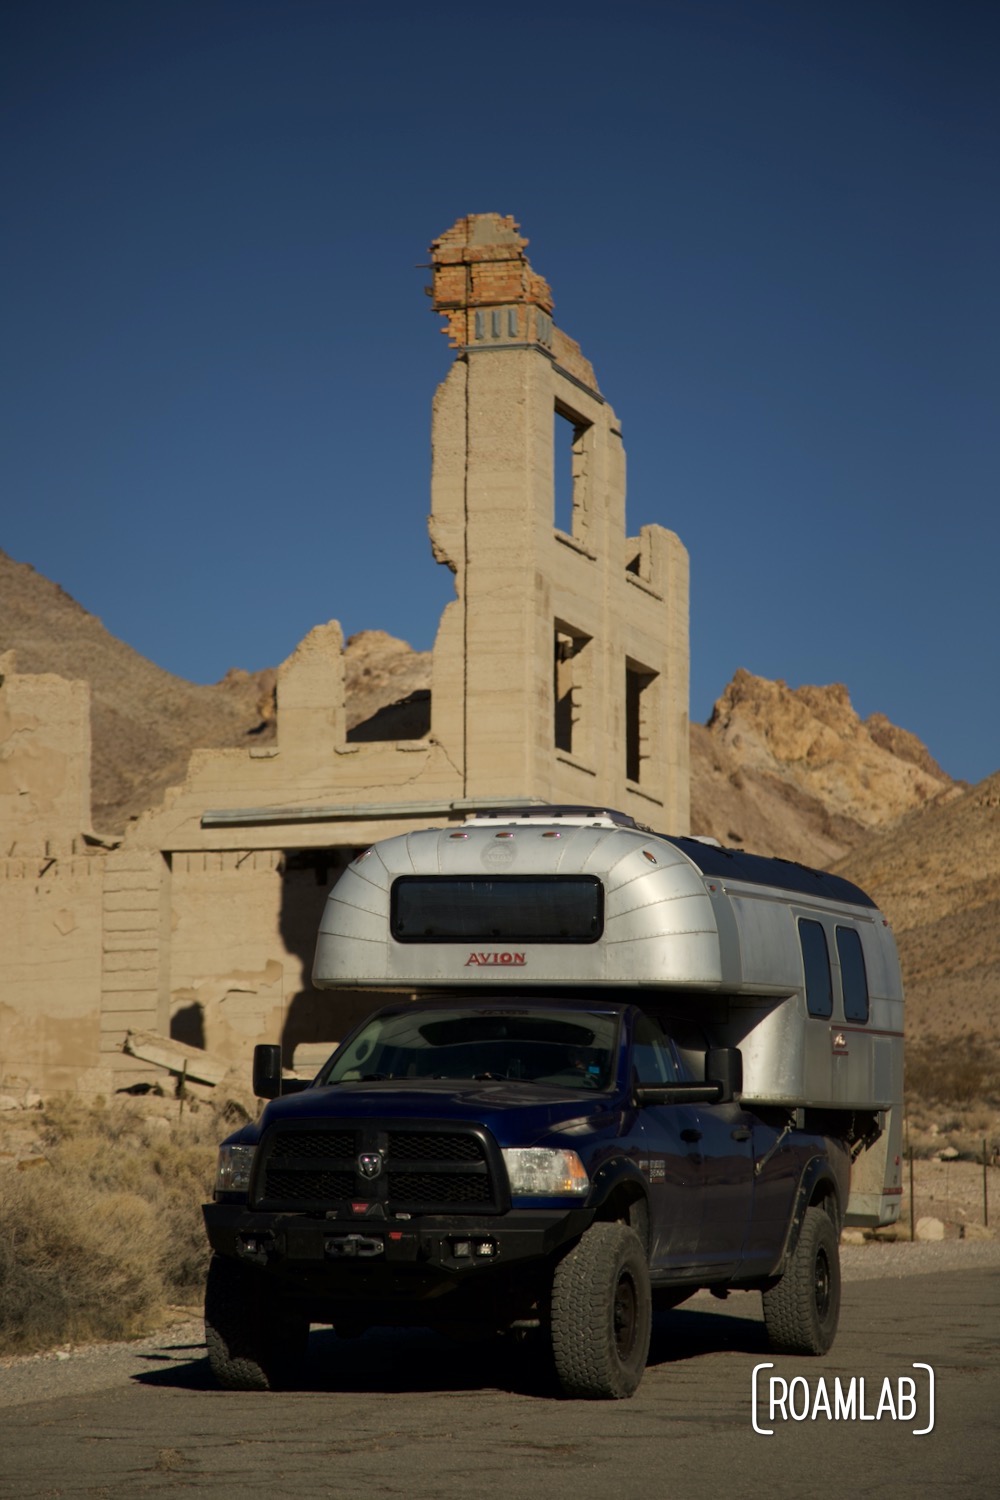 1970 Avion C11 truck camper driving by a collection of ruined buildings with desert mountains rising in the background.